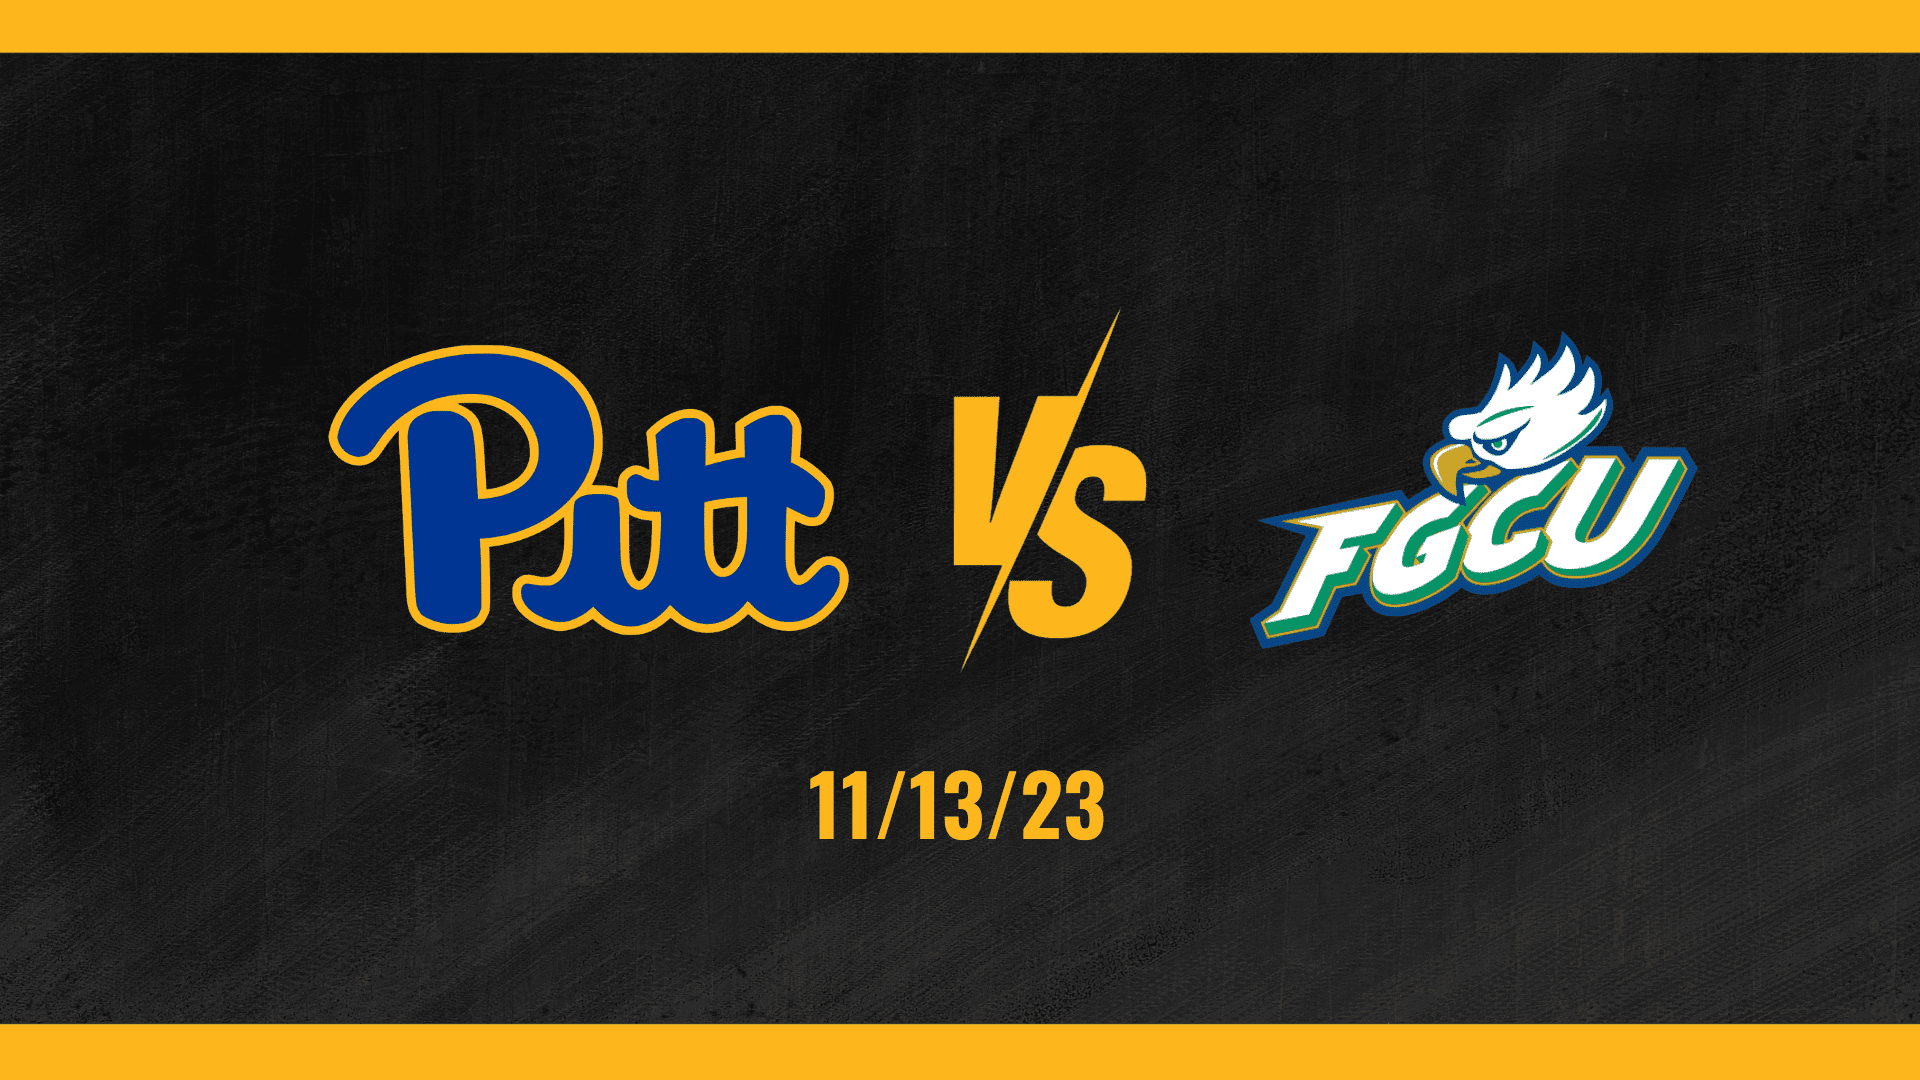 Pitt will take on Florida Gulf Coast on Monday, Nov. 13 in college basketball action. Check on Pittsburgh Sports Noe here for the PREVIEW, SPREAD, SCORE, SCHEDULE, and more.